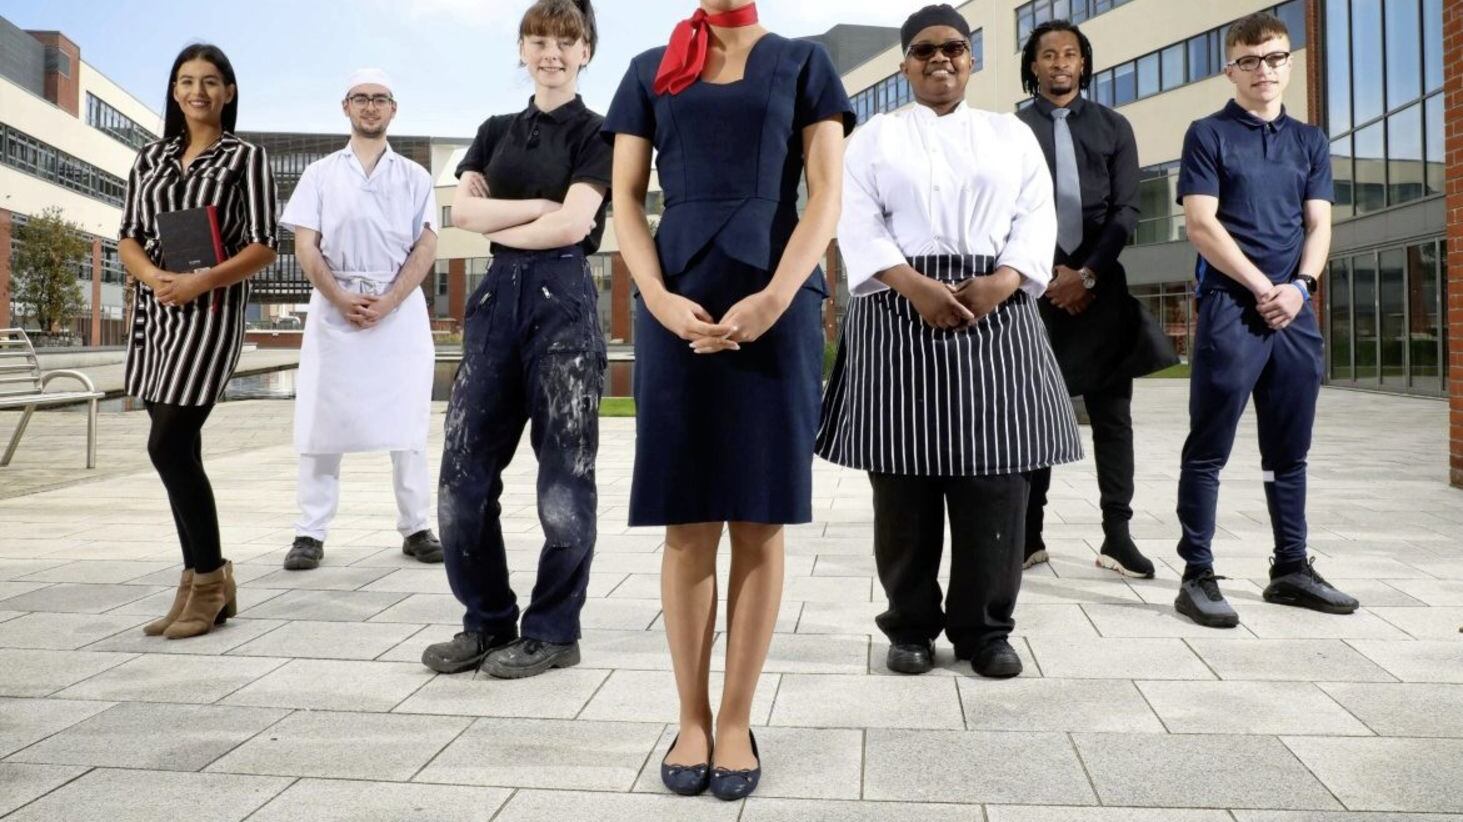 FE FOR ME: Former business management student Aimee McWilliams, catering student Adam Aston, plumbing apprentice Shannon Neilly, aviation student Laura Rutherford, catering students Juvaldino Baretto and Adenike Yisa lawal and Boxing Academy student Jack Haighton 